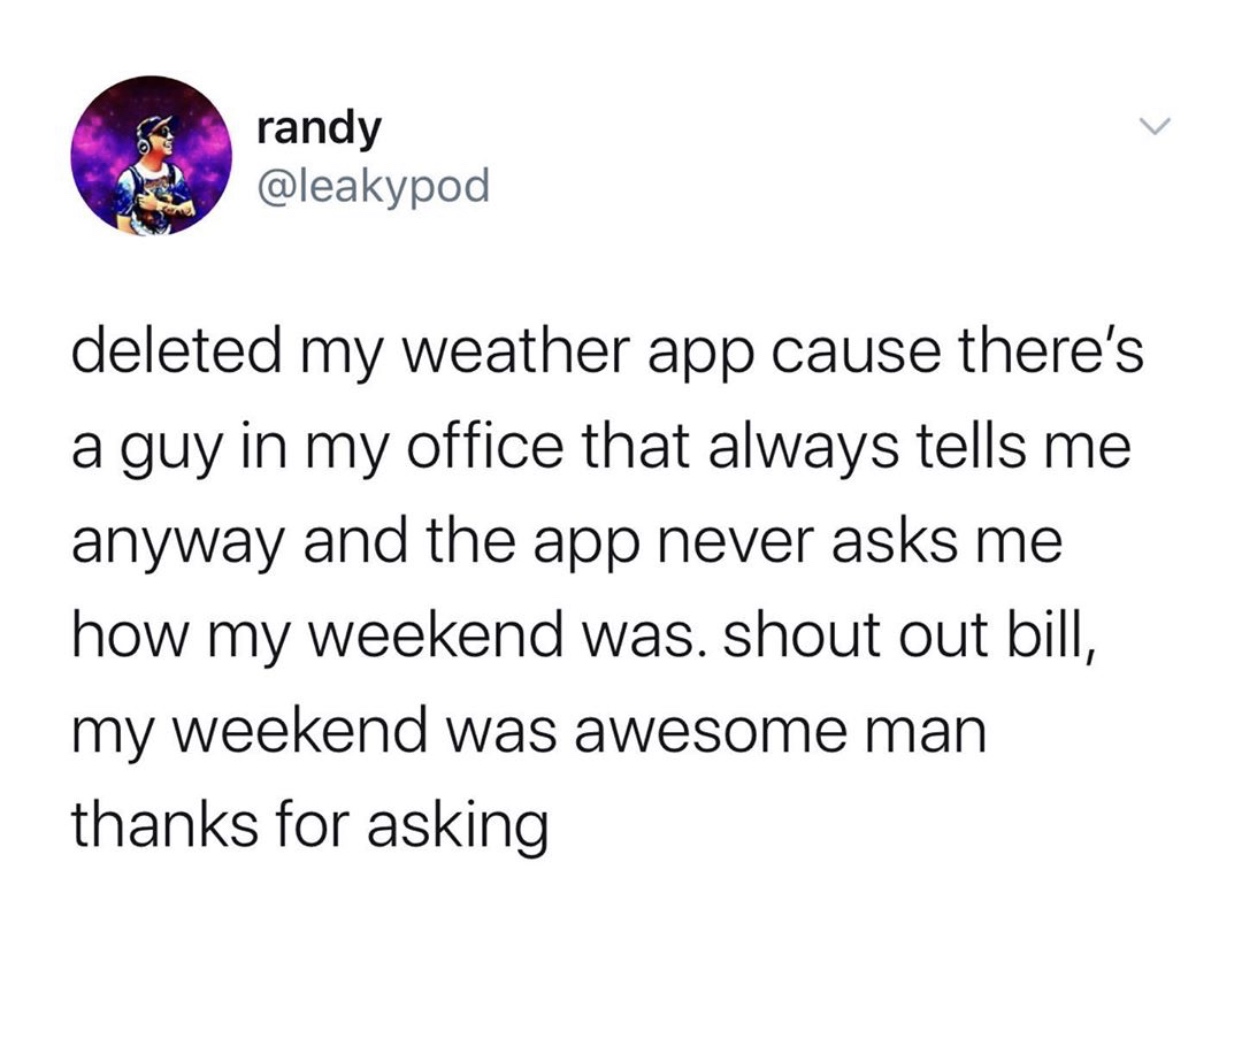 angle - G randy randy deleted my weather app cause there's a guy in my office that always tells me anyway and the app never asks me how my weekend was. shout out bill, my weekend was awesome man thanks for asking